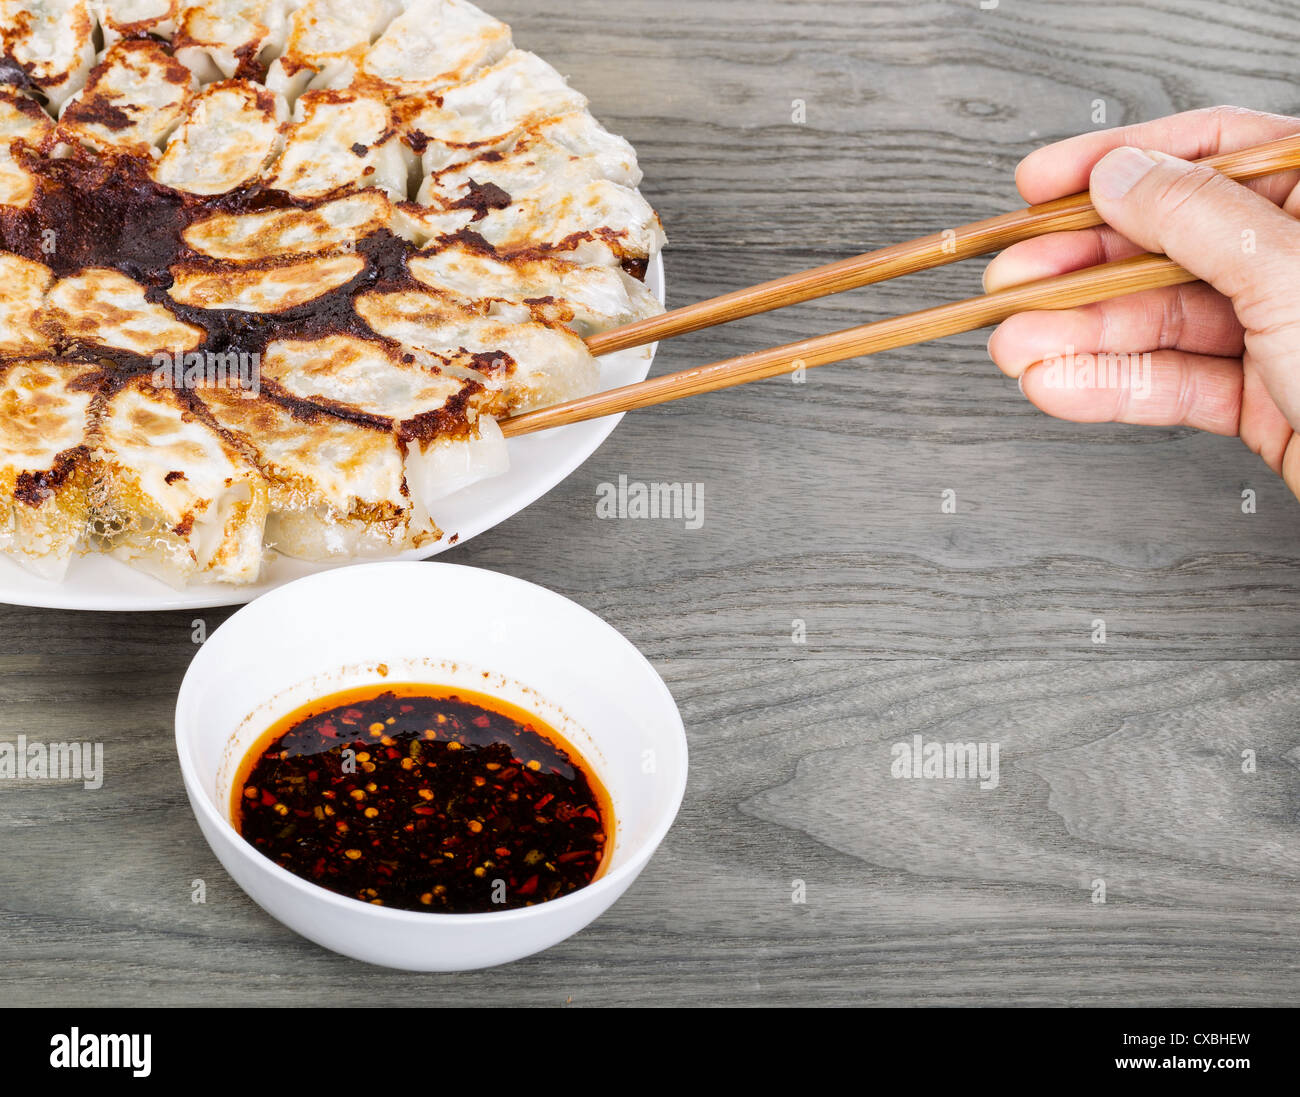 Hand holding chopsticks with Chinese dumplings on white plate with wood table in background Stock Photo